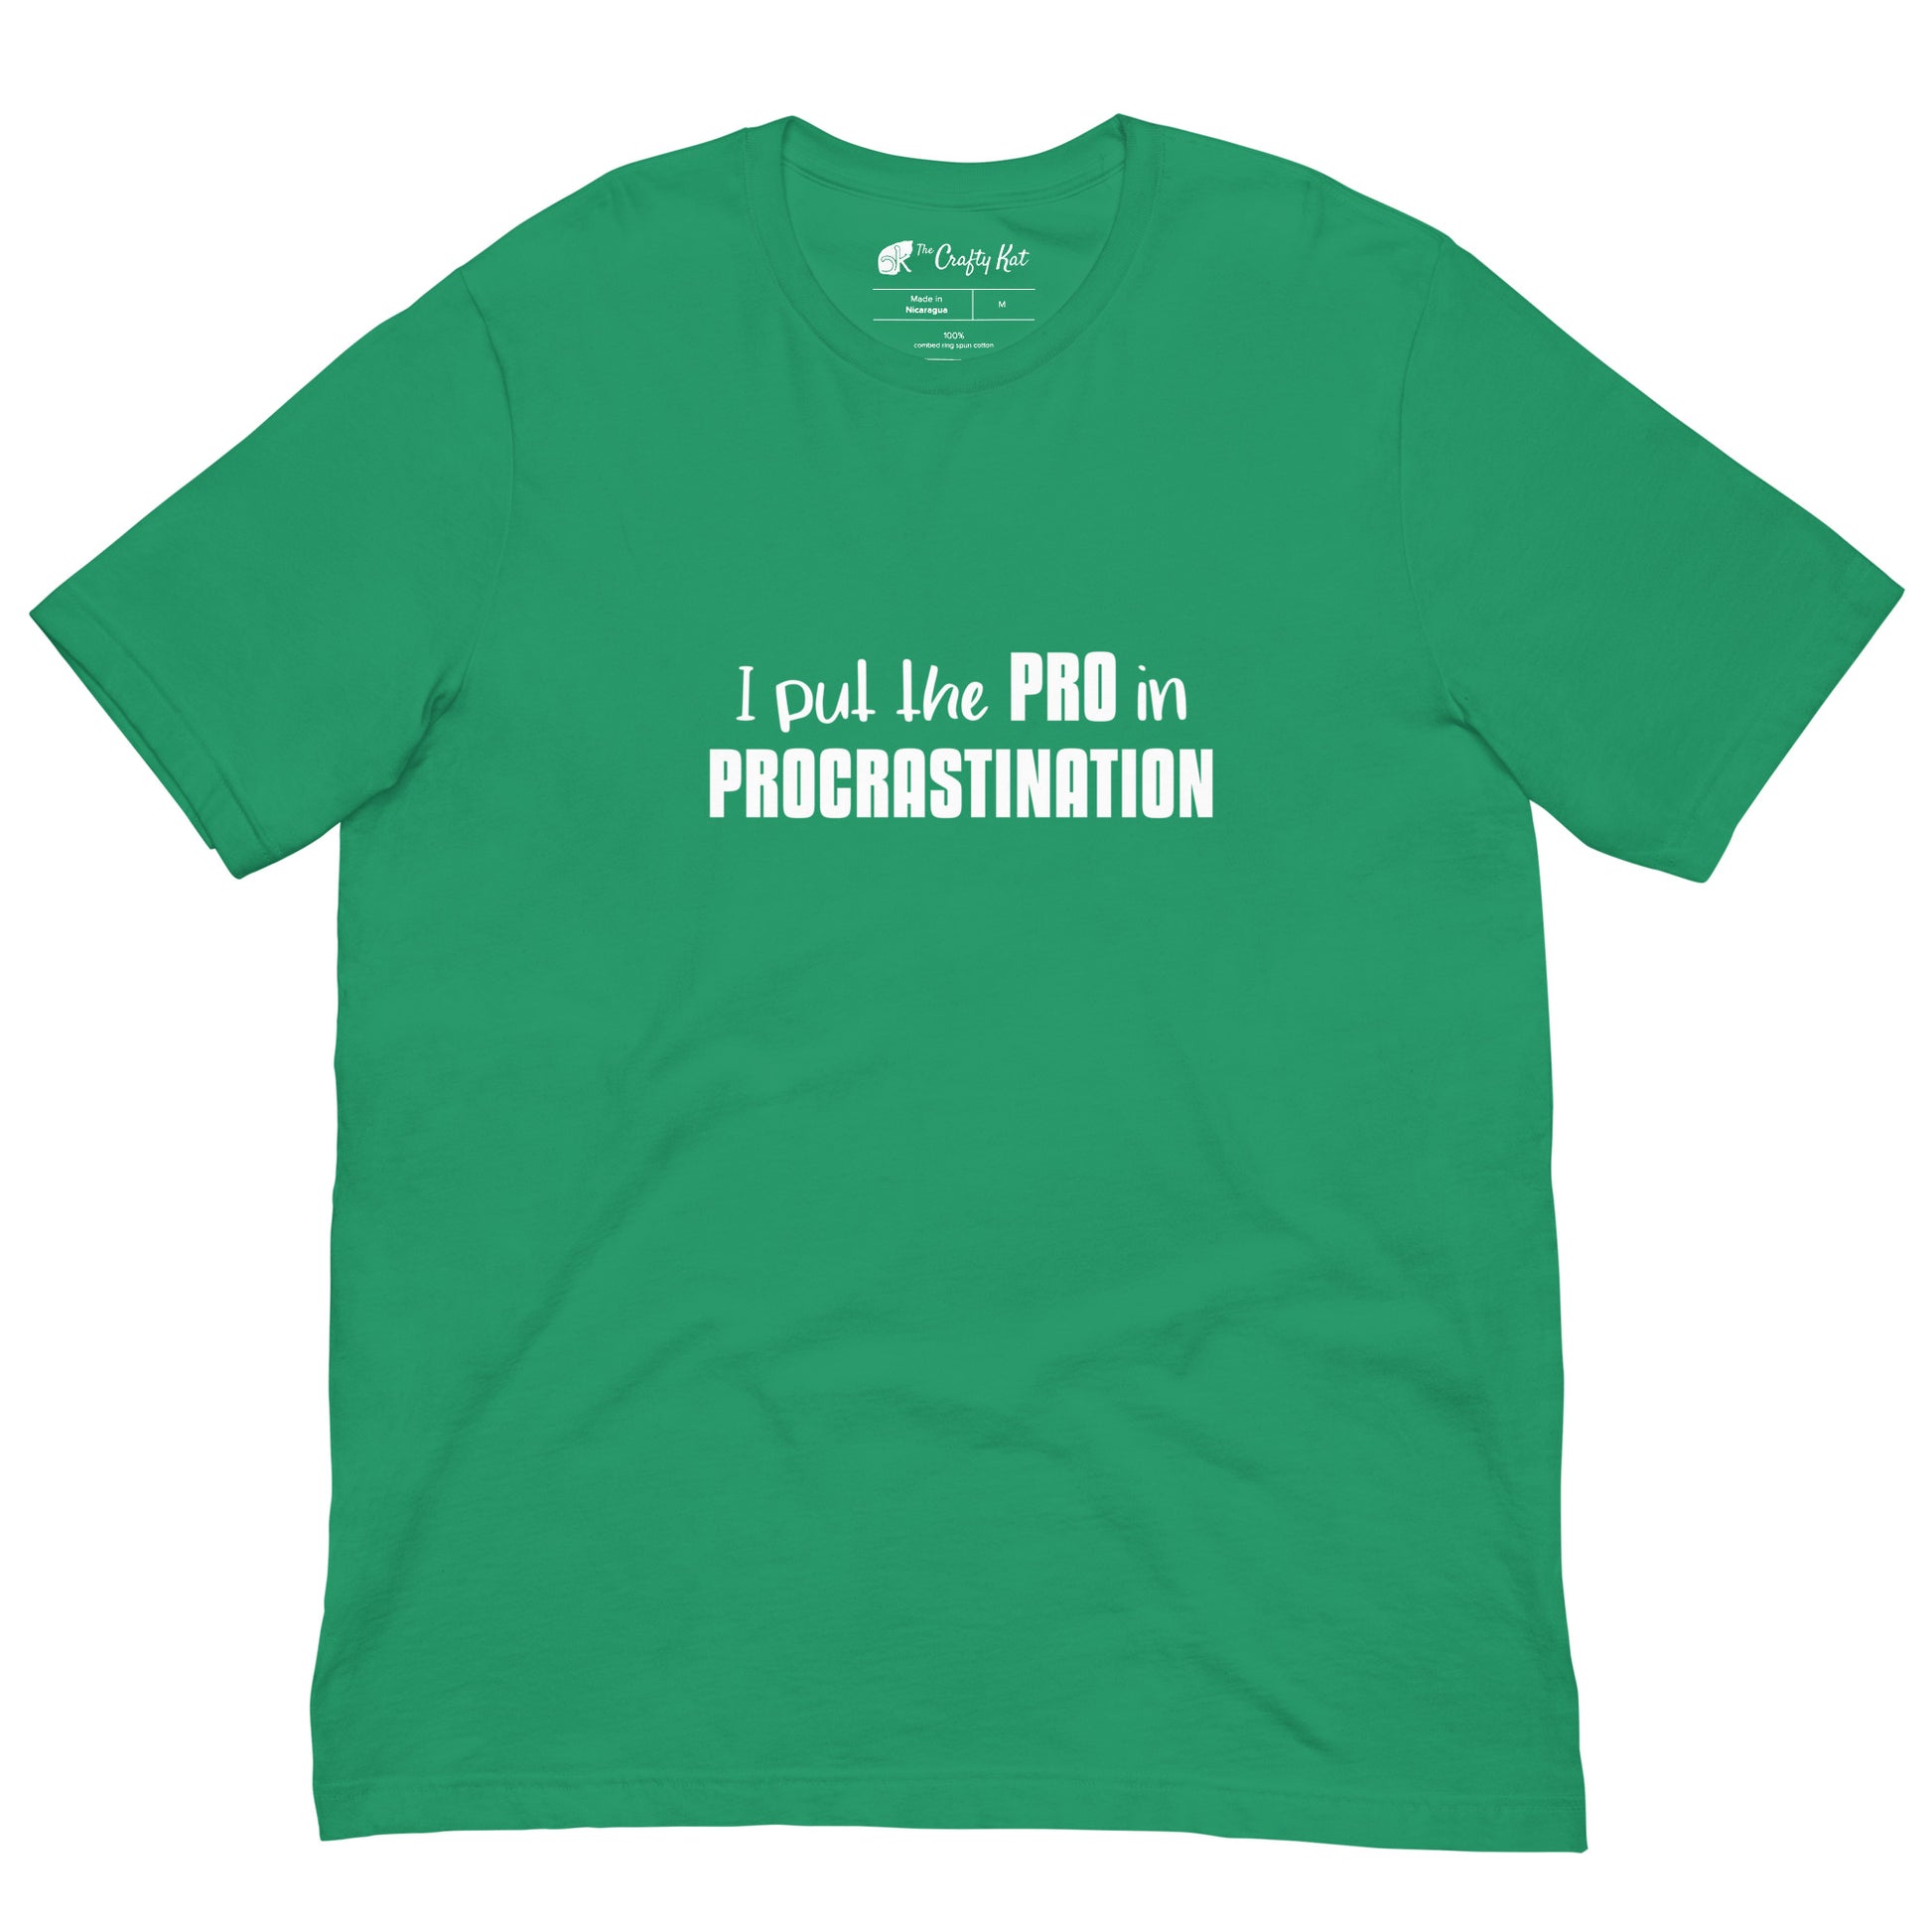 Kelly green unisex t-shirt with text graphic: "I put the PRO in PROCRASTINATION"